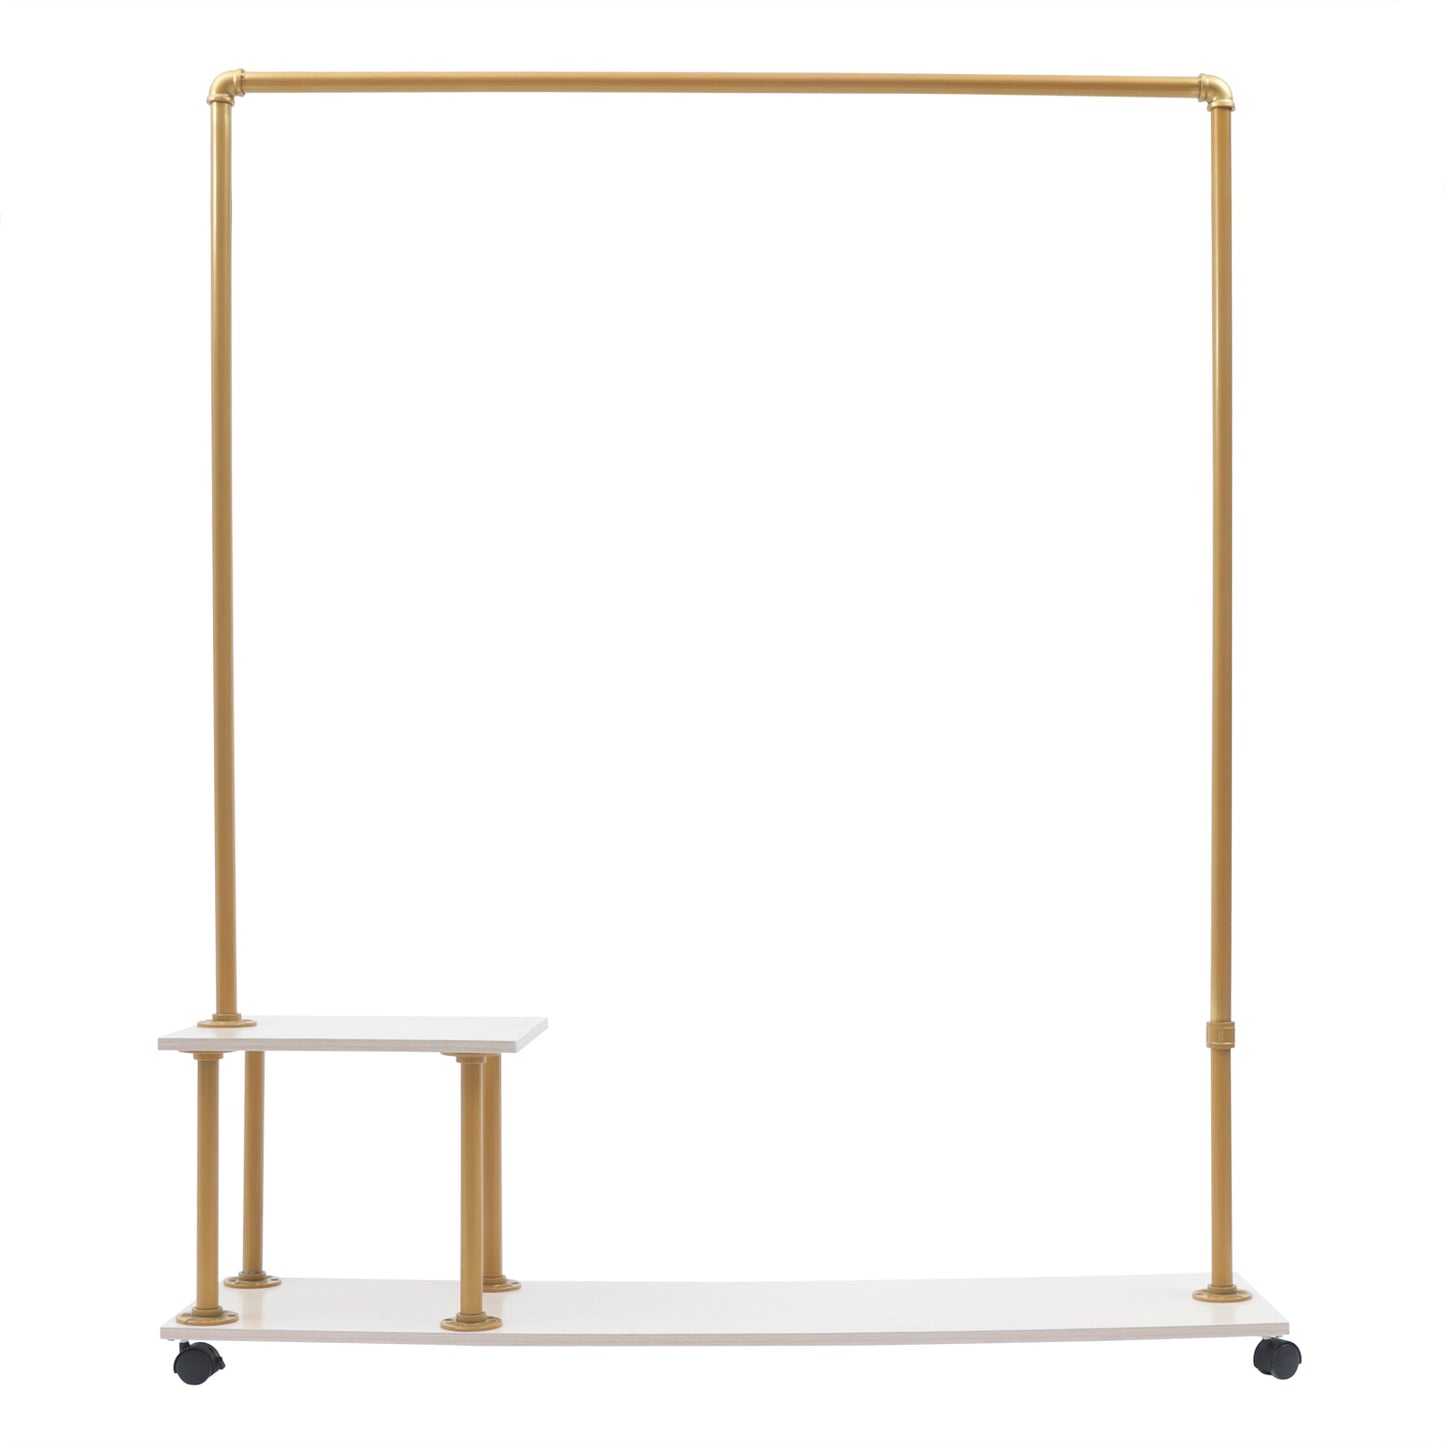 125*30*150cm Commercial Metal Pipe Clothing Rack Storage Garment Rack With Wheels Shelf Gold